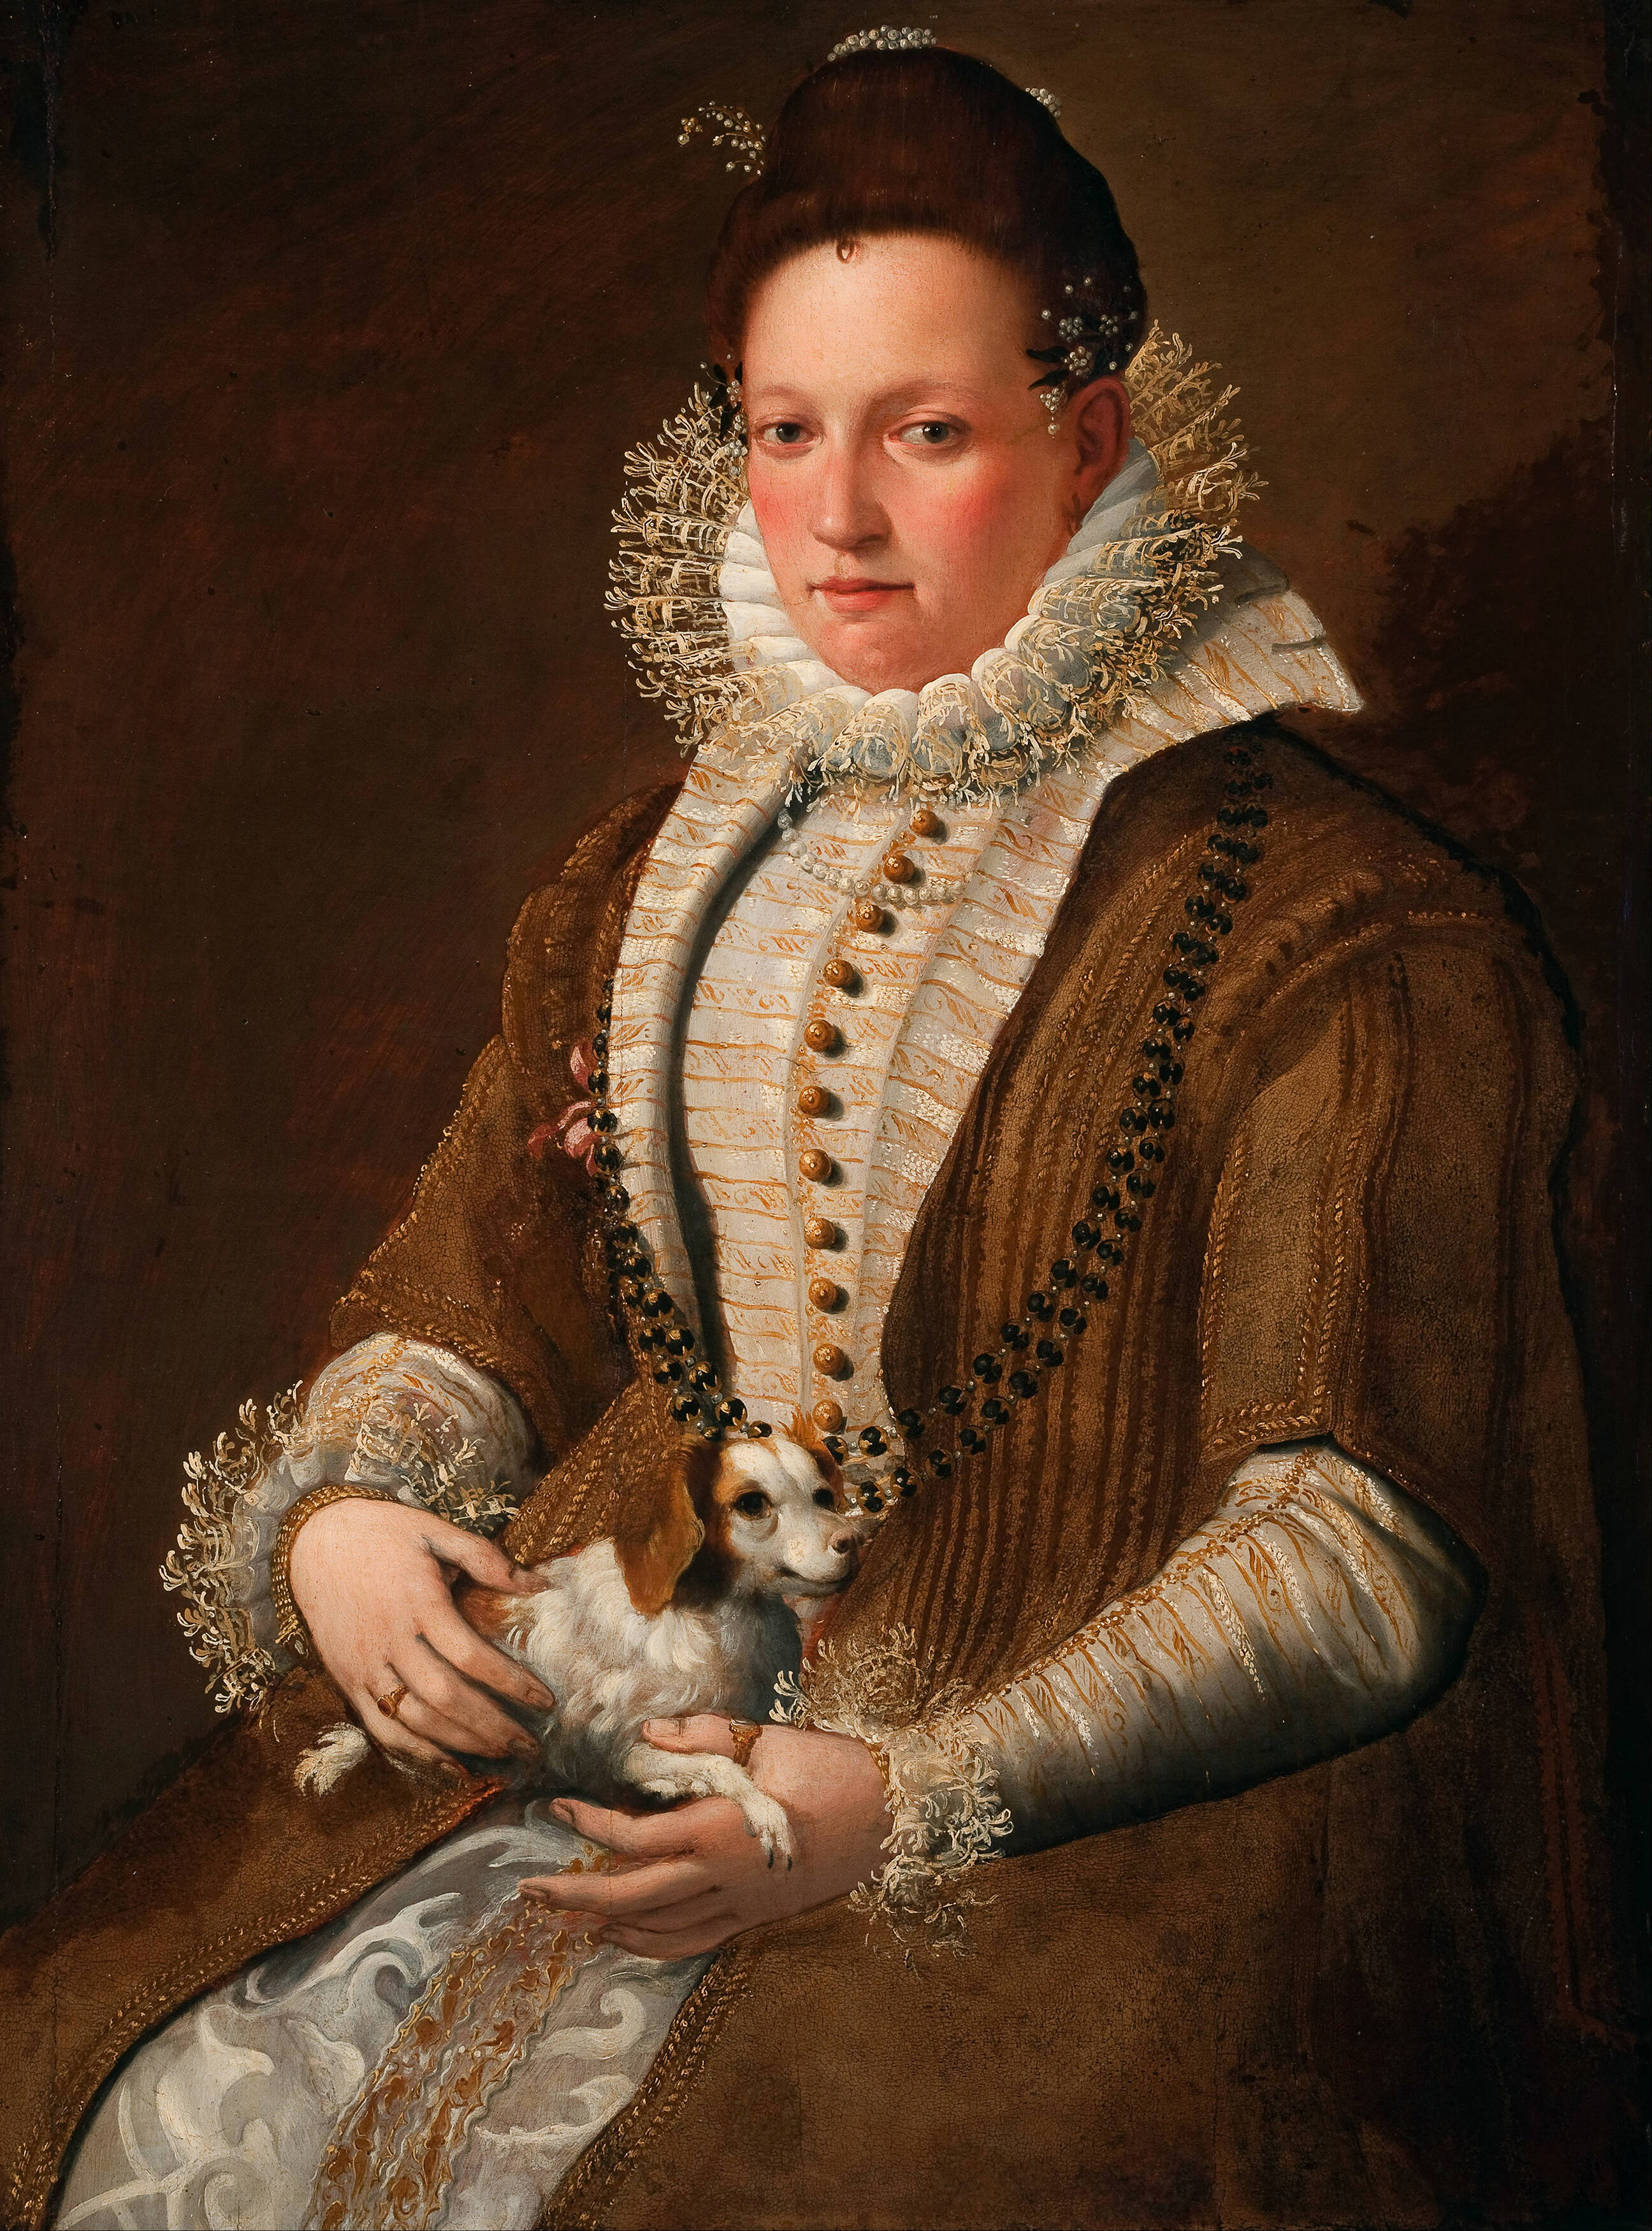 <p><strong>Lavinia Fontana</strong> <em>Portrait of a lady with a dog</em>, 1590s, Mackelvie Trust Collection, Auckland Art Gallery Toi o Tāmaki, purchased 1956</p>
